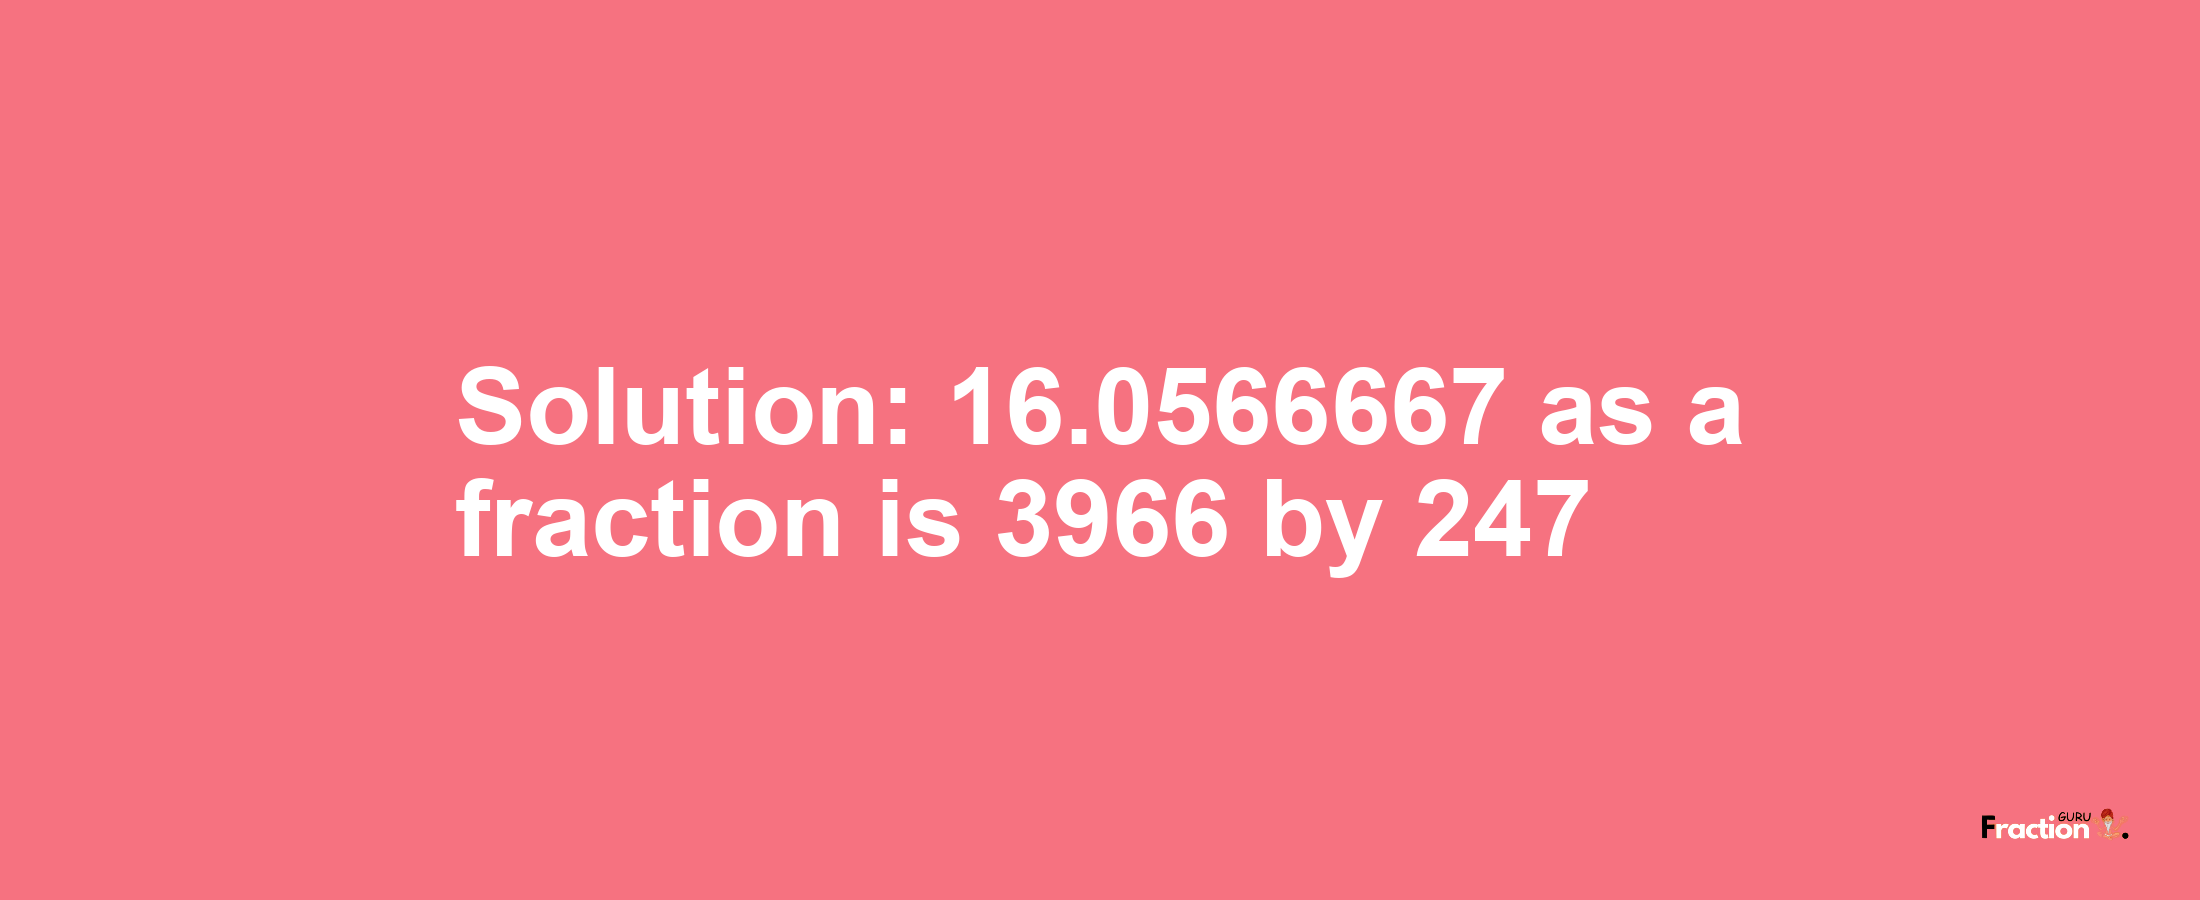 Solution:16.0566667 as a fraction is 3966/247